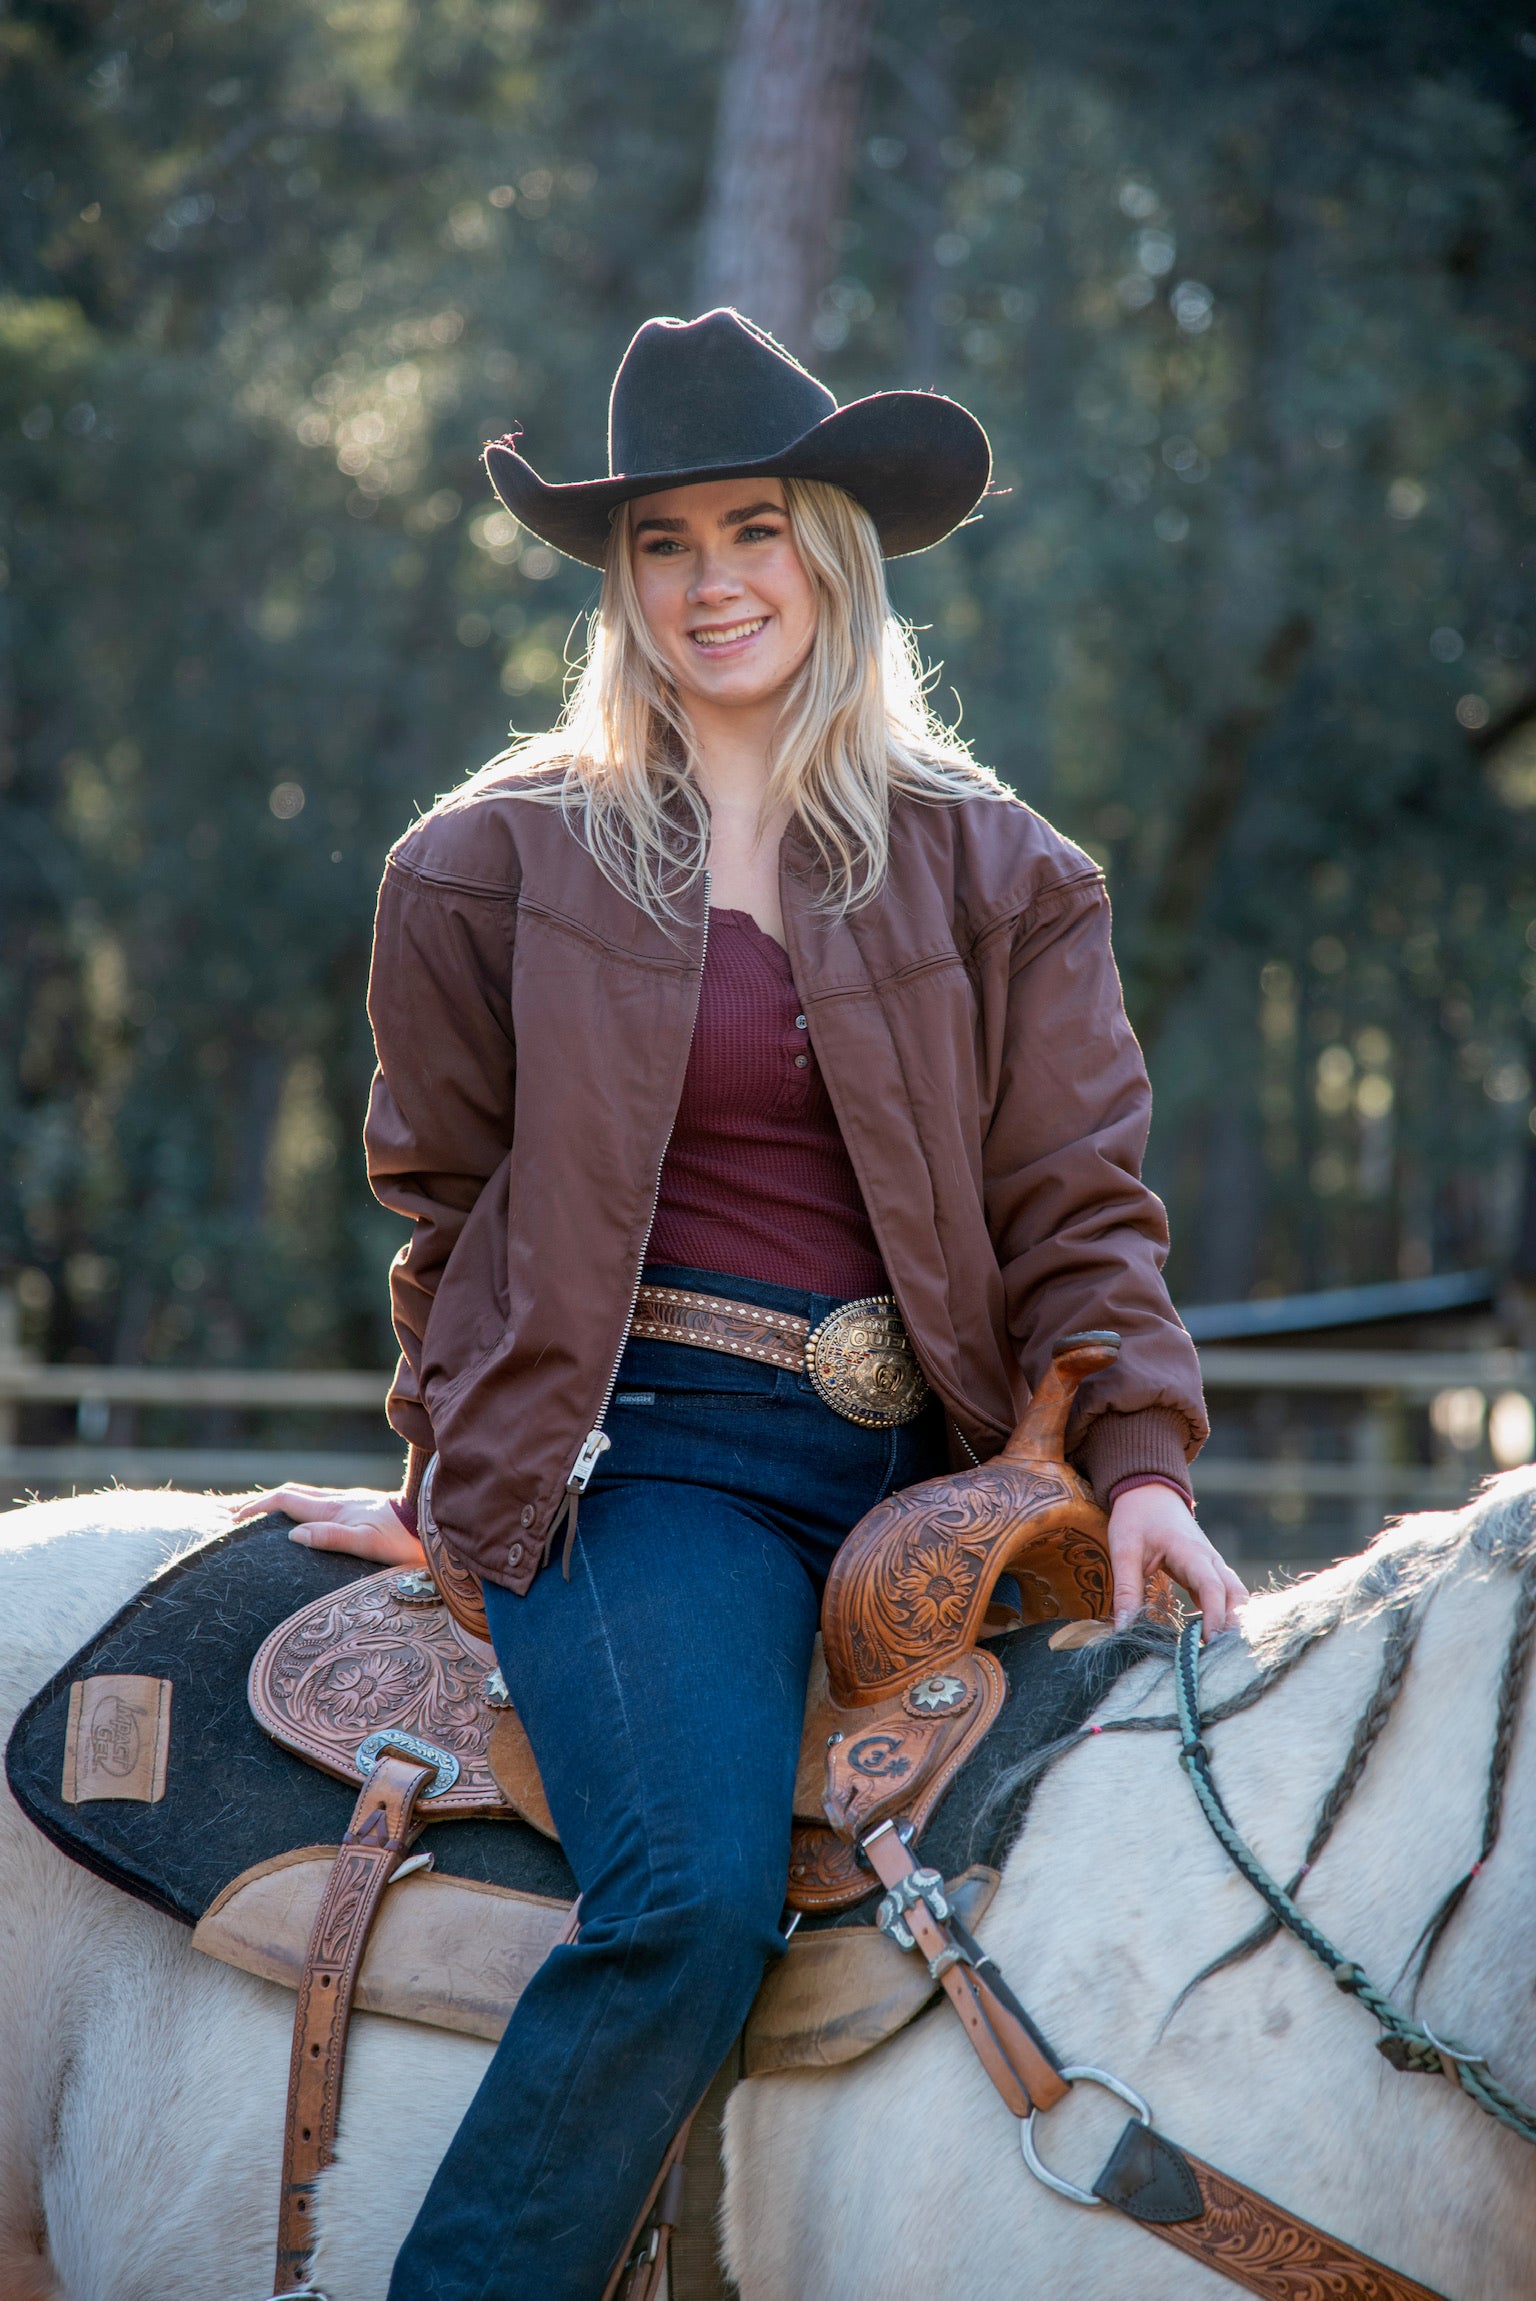 GIRL ON TOP OF HORSE WEARING A CHOCOLATE BROWN JACKET 